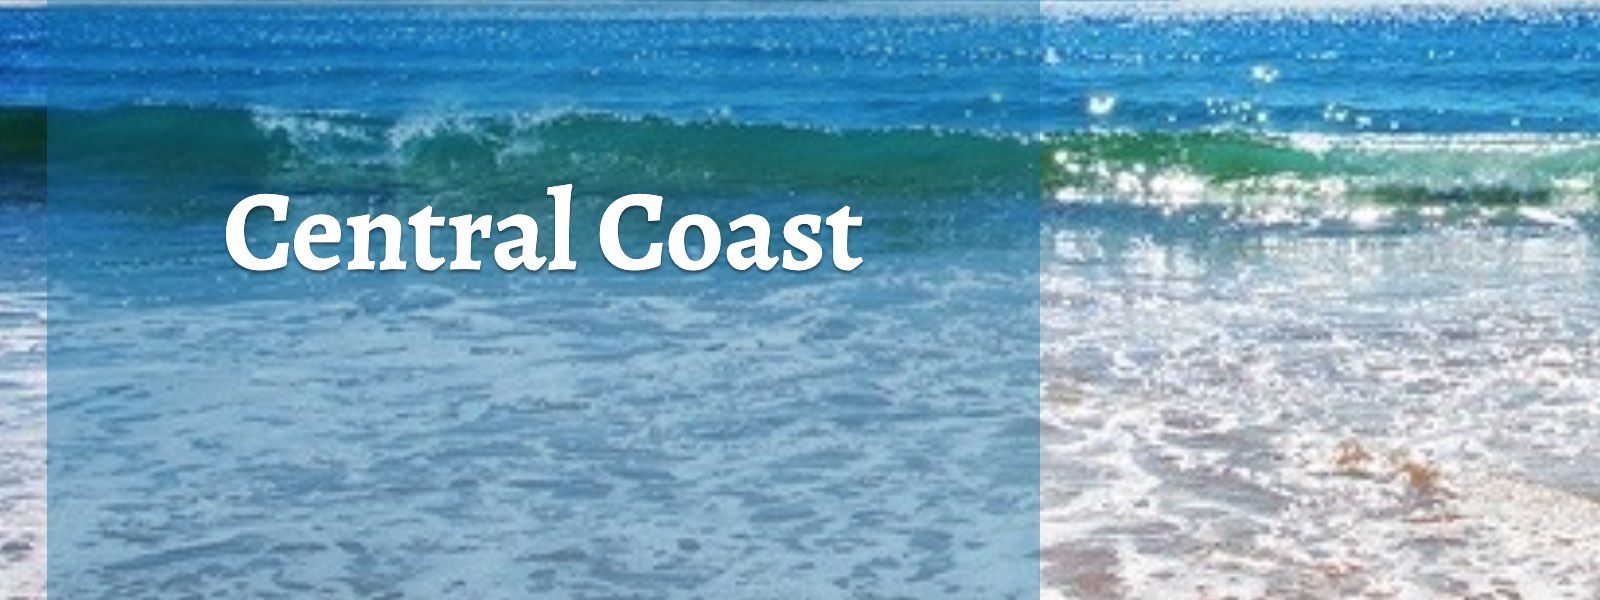 Team Building events on the Central Coast